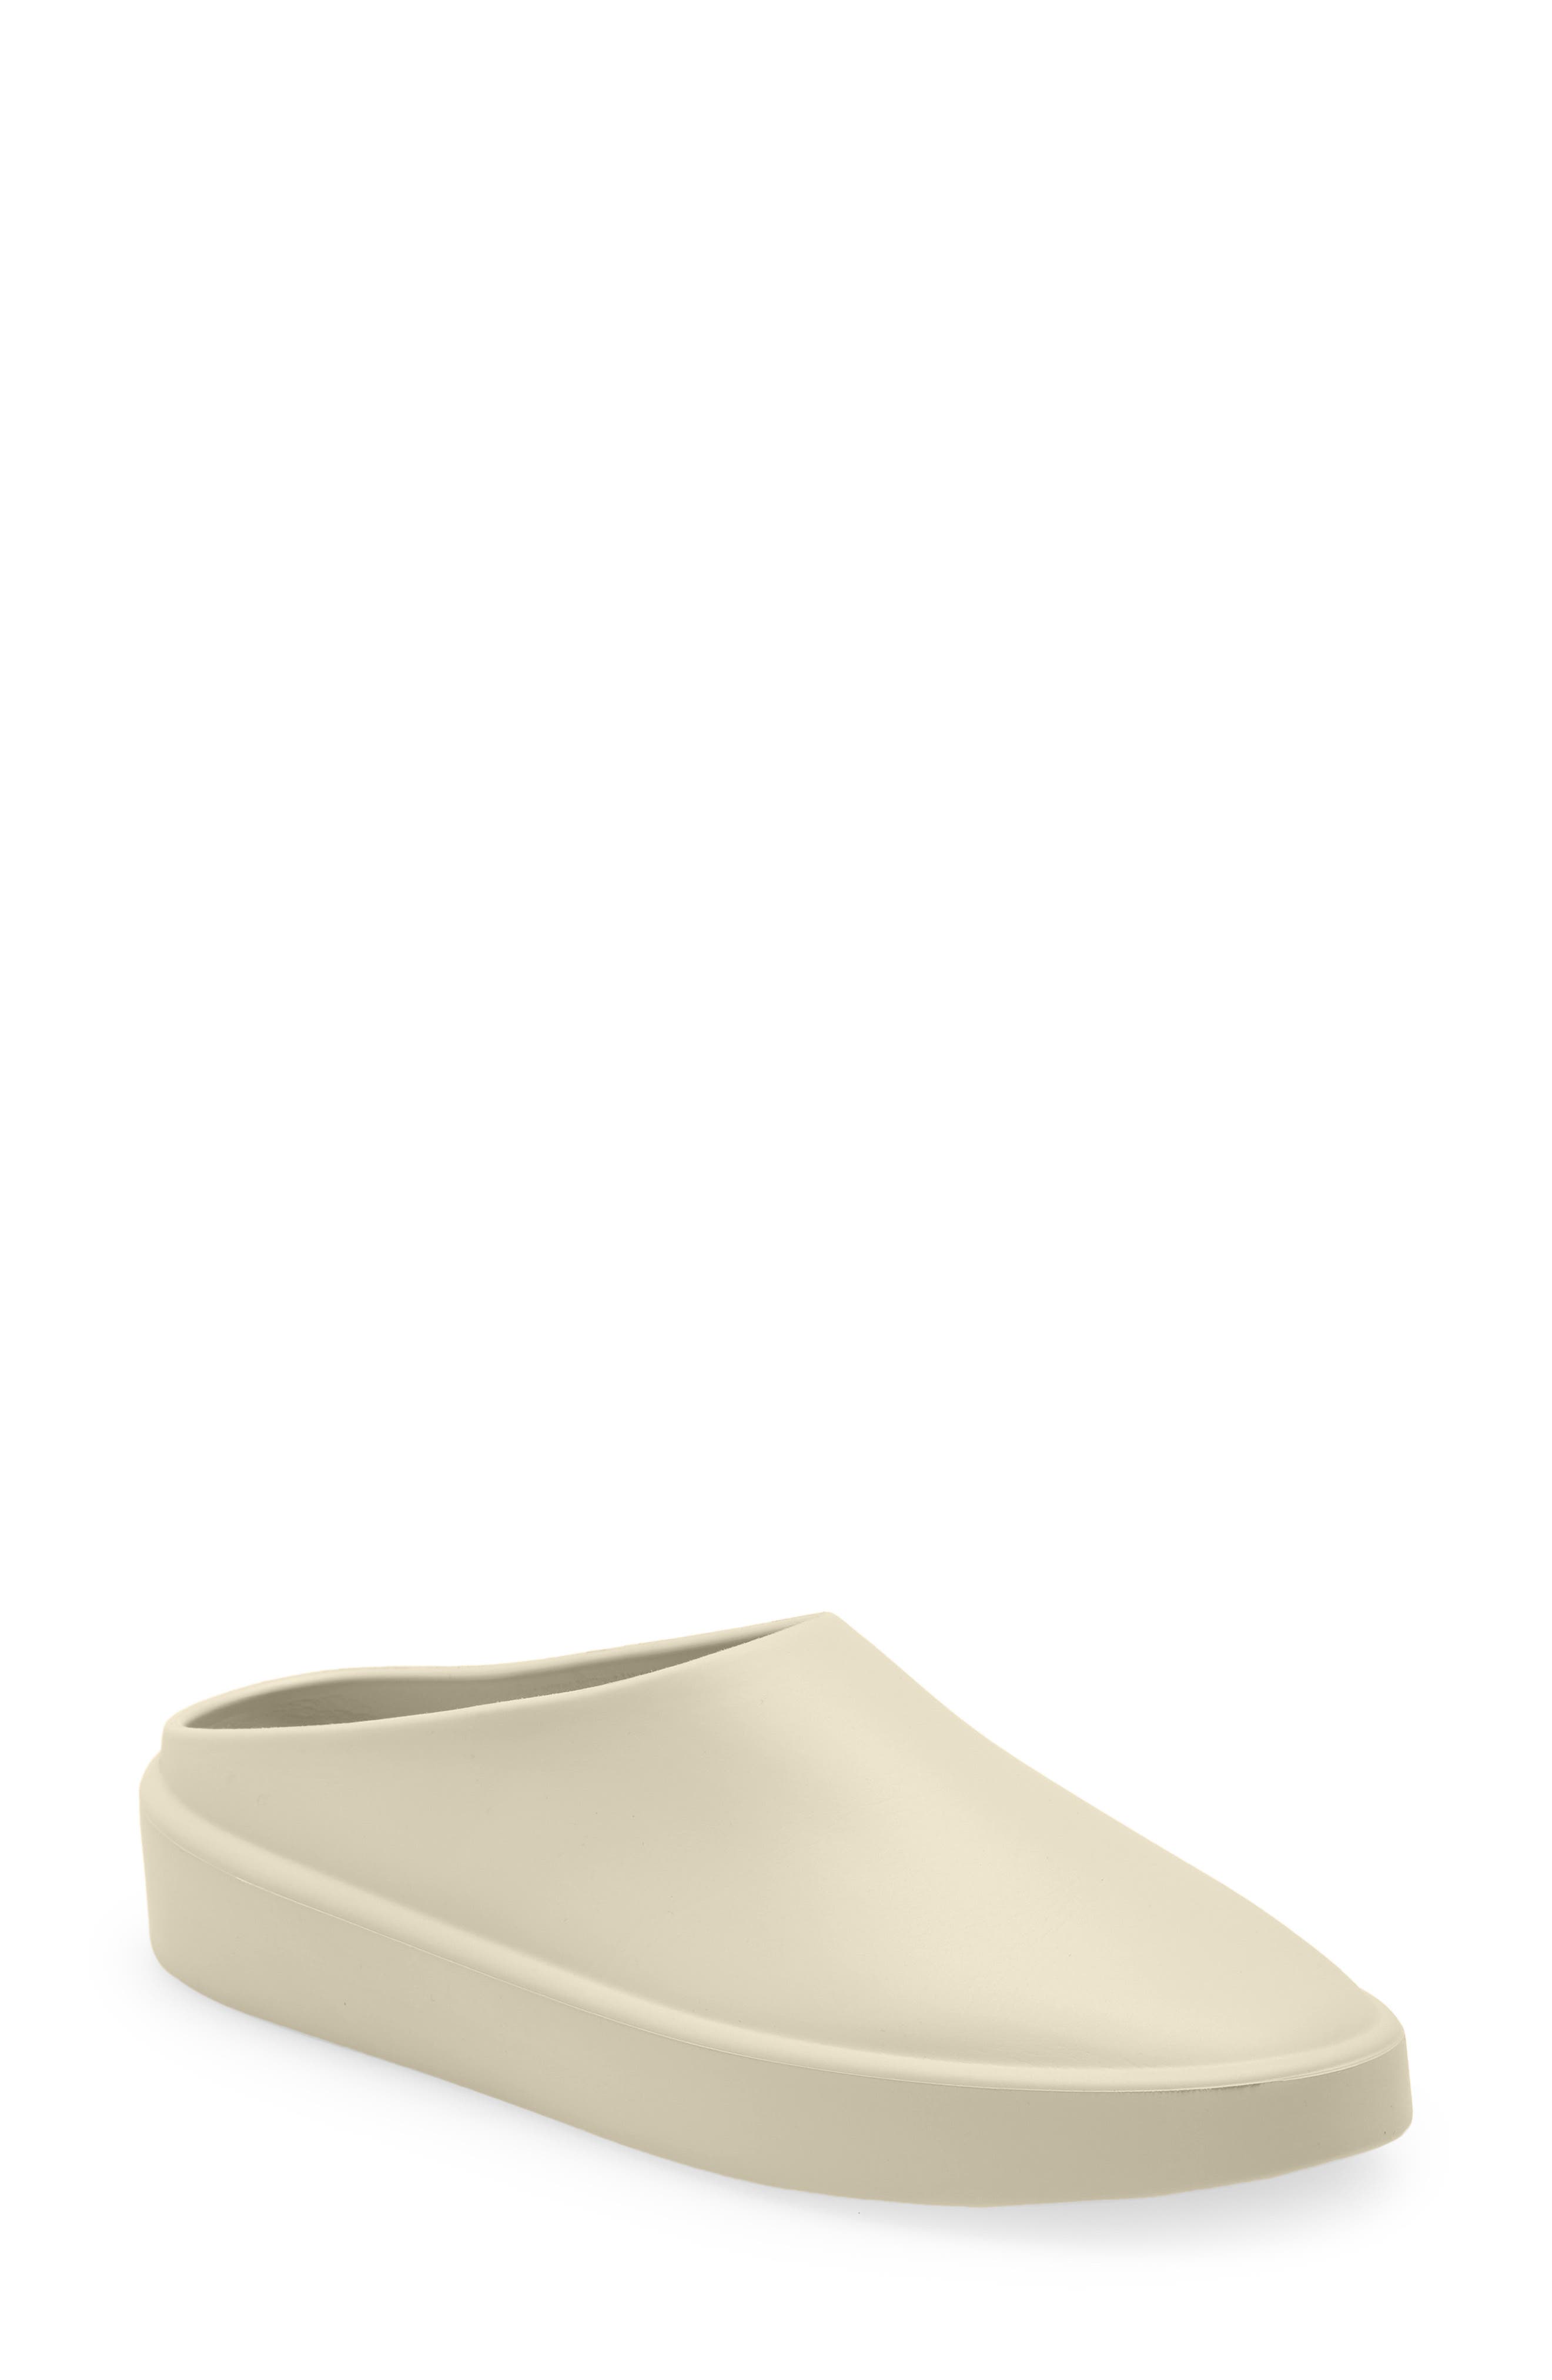 Fear of God The California Mule in Cream at Nordstrom, Size 15Us